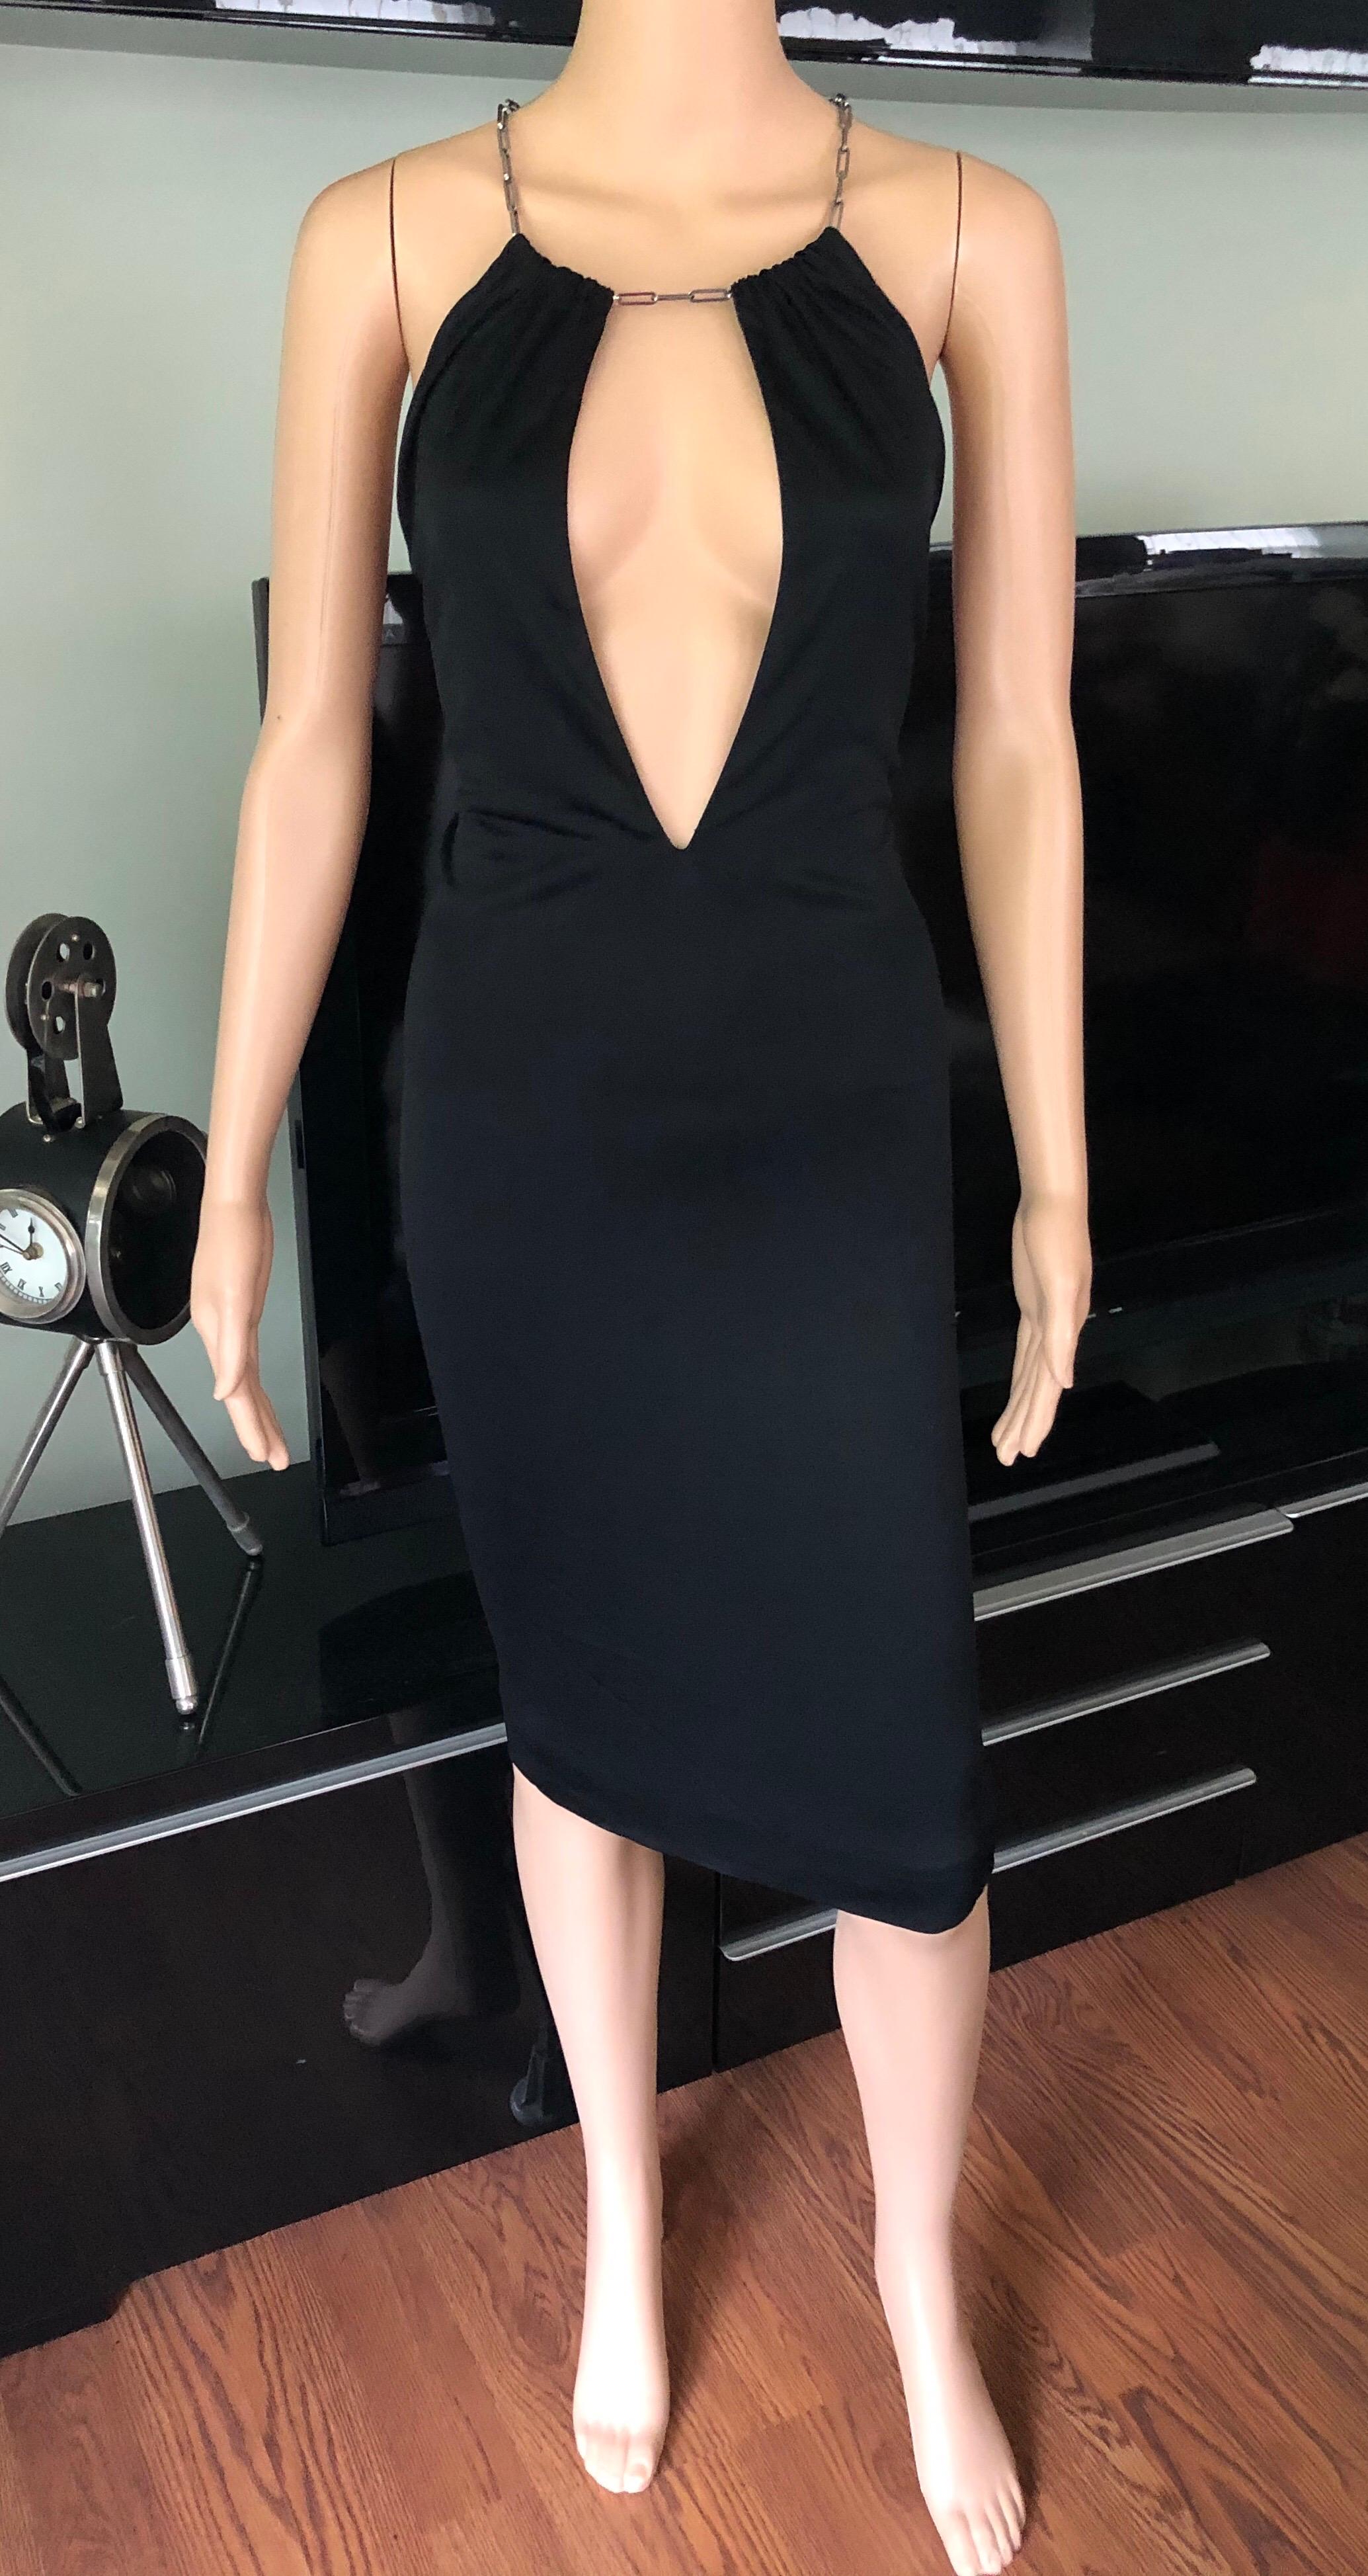 Tom Ford for Gucci S/S 2000 Plunging Neckline Halter Black Dress IT 38

Gucci midi dress featuring halter neck with cutout and chain at neck. 